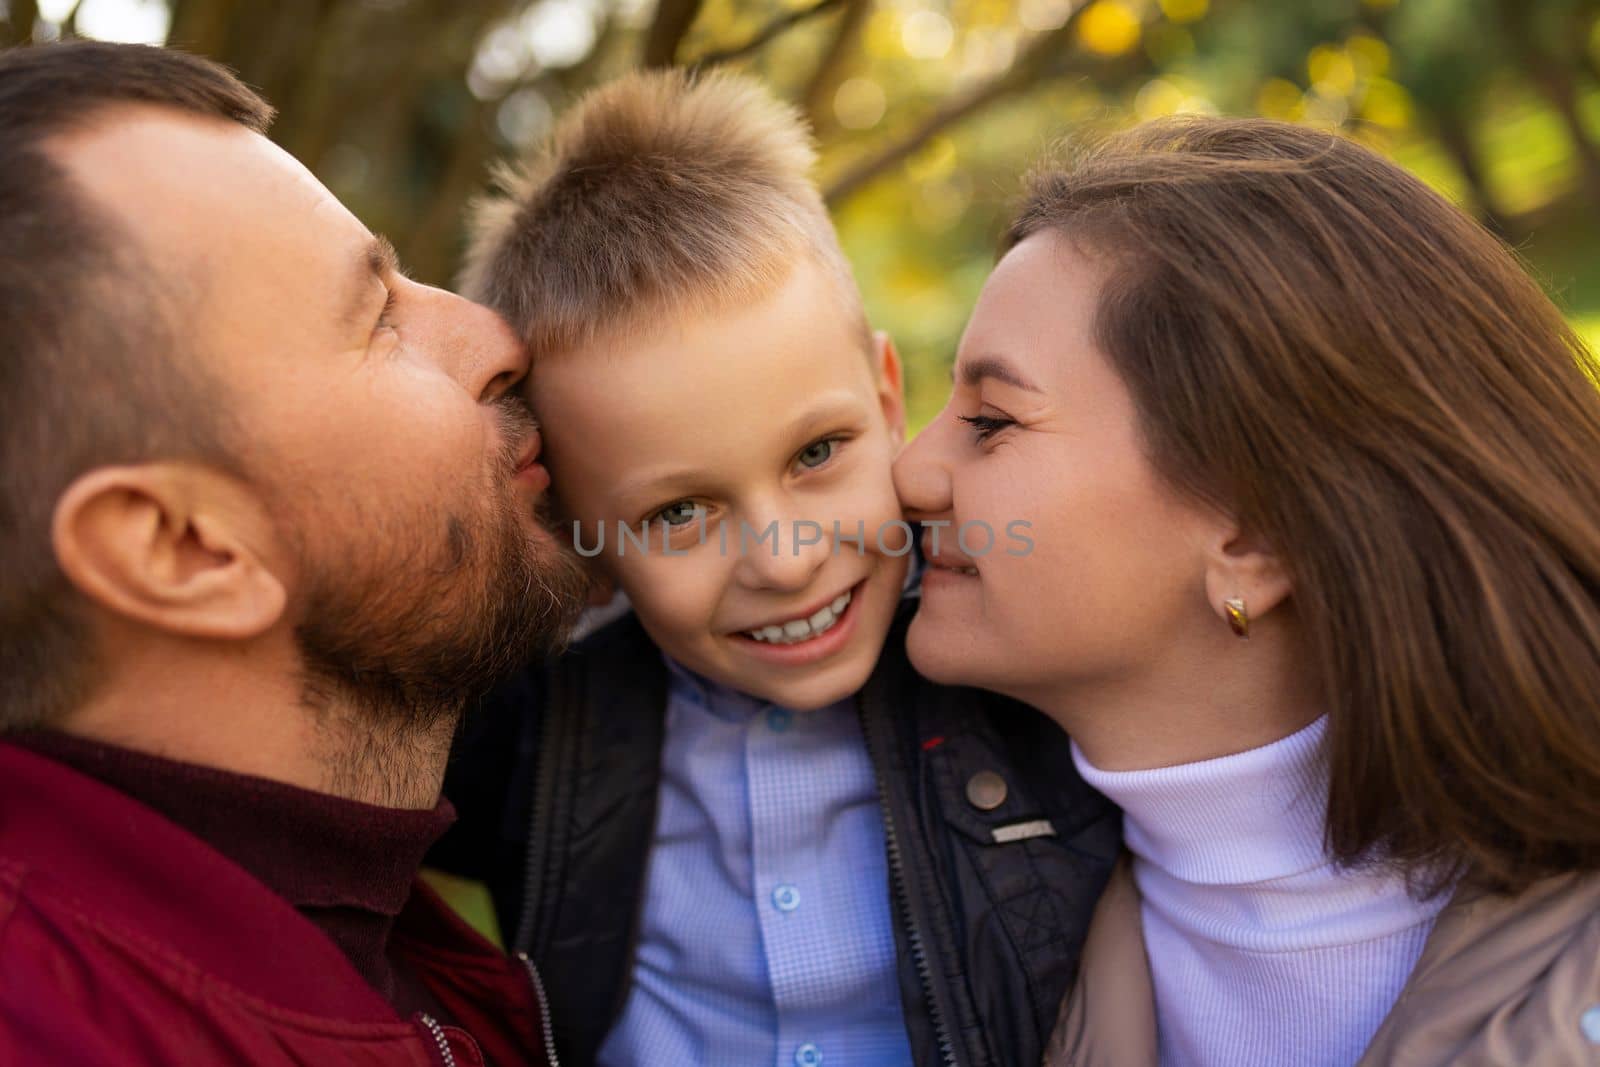 mom and dad kissing a child boy between themselves, close-up portrait.